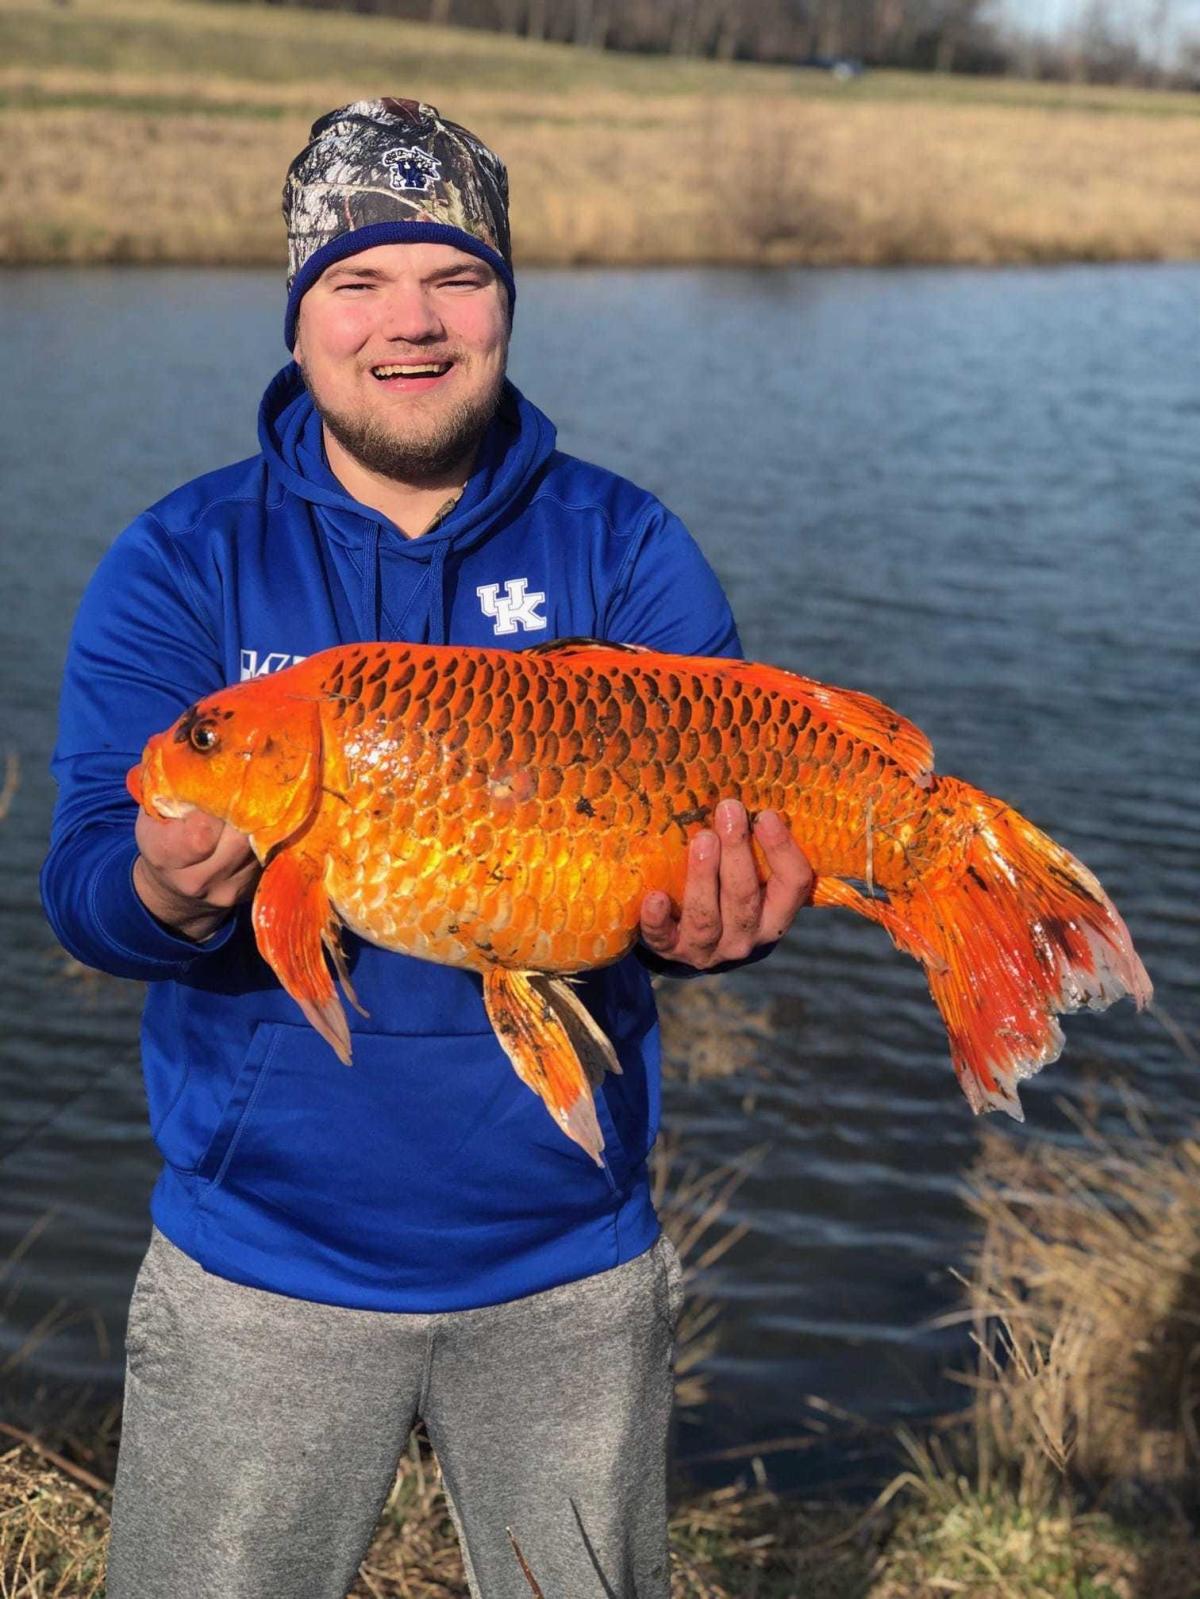 Stop tossing your pet goldfish in lakes, officials warn. 'They grow bigger  than you think